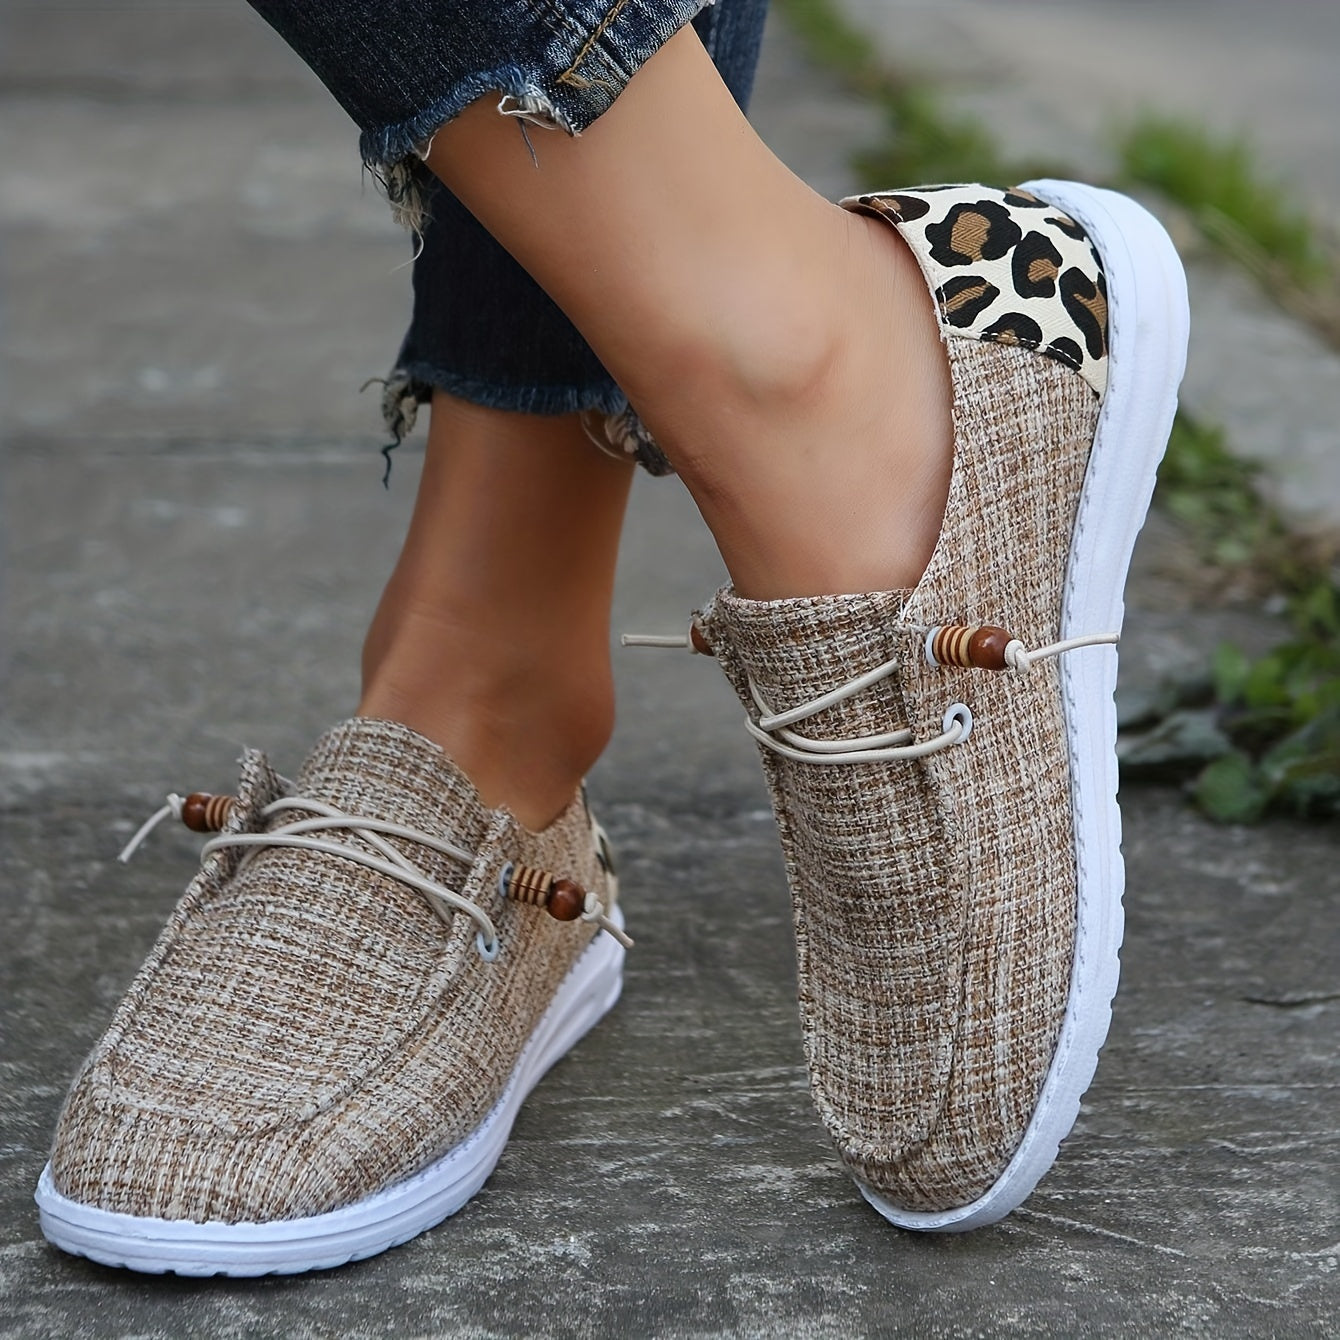 Women's Casual Flat Loafers, Round Toe Leopard Print Slip On Low Top Canvas Shoes, Comfy Flat Sneakers